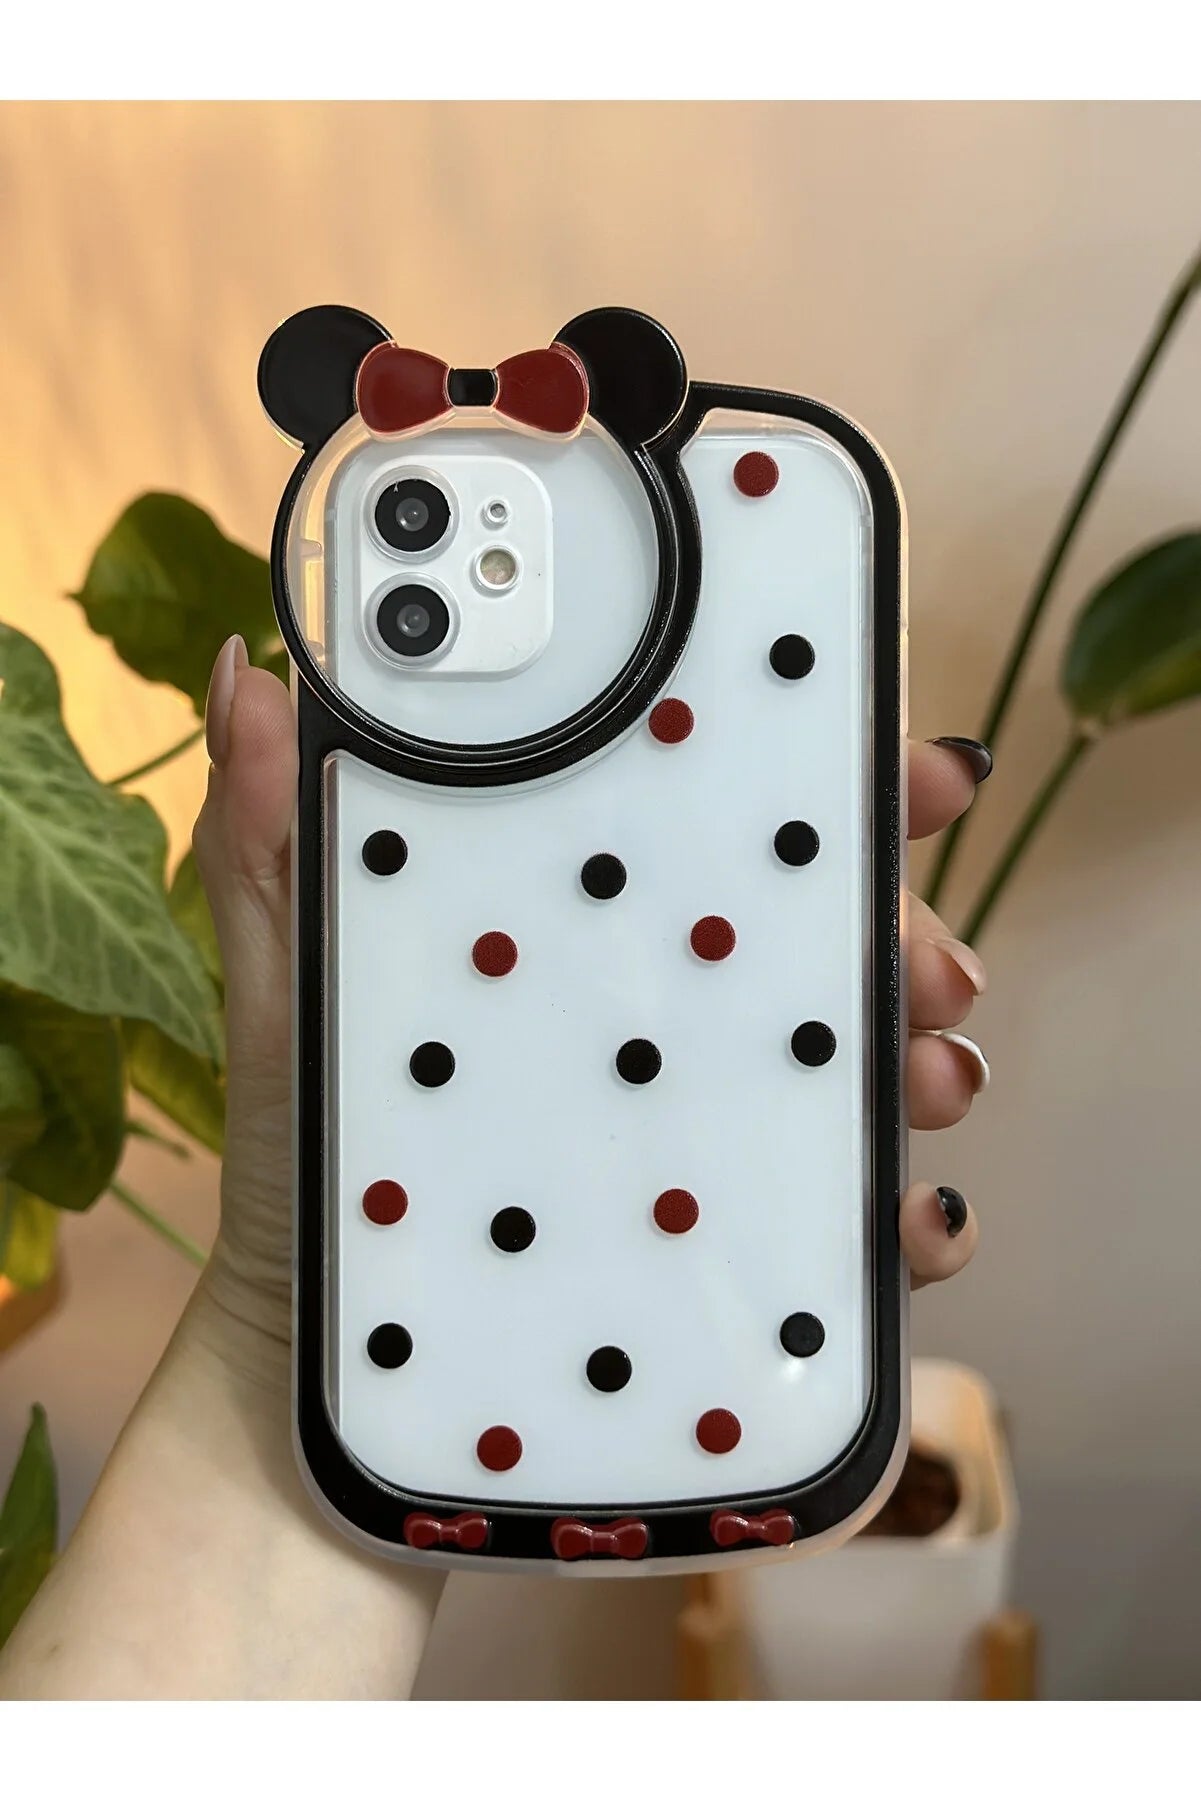 Special Design Thick Silicone Protective Case for iPhone 11 - Mickey Mouse 3D Cartoon Character with Black Ears, Compatible with 3rd and 4th Generations